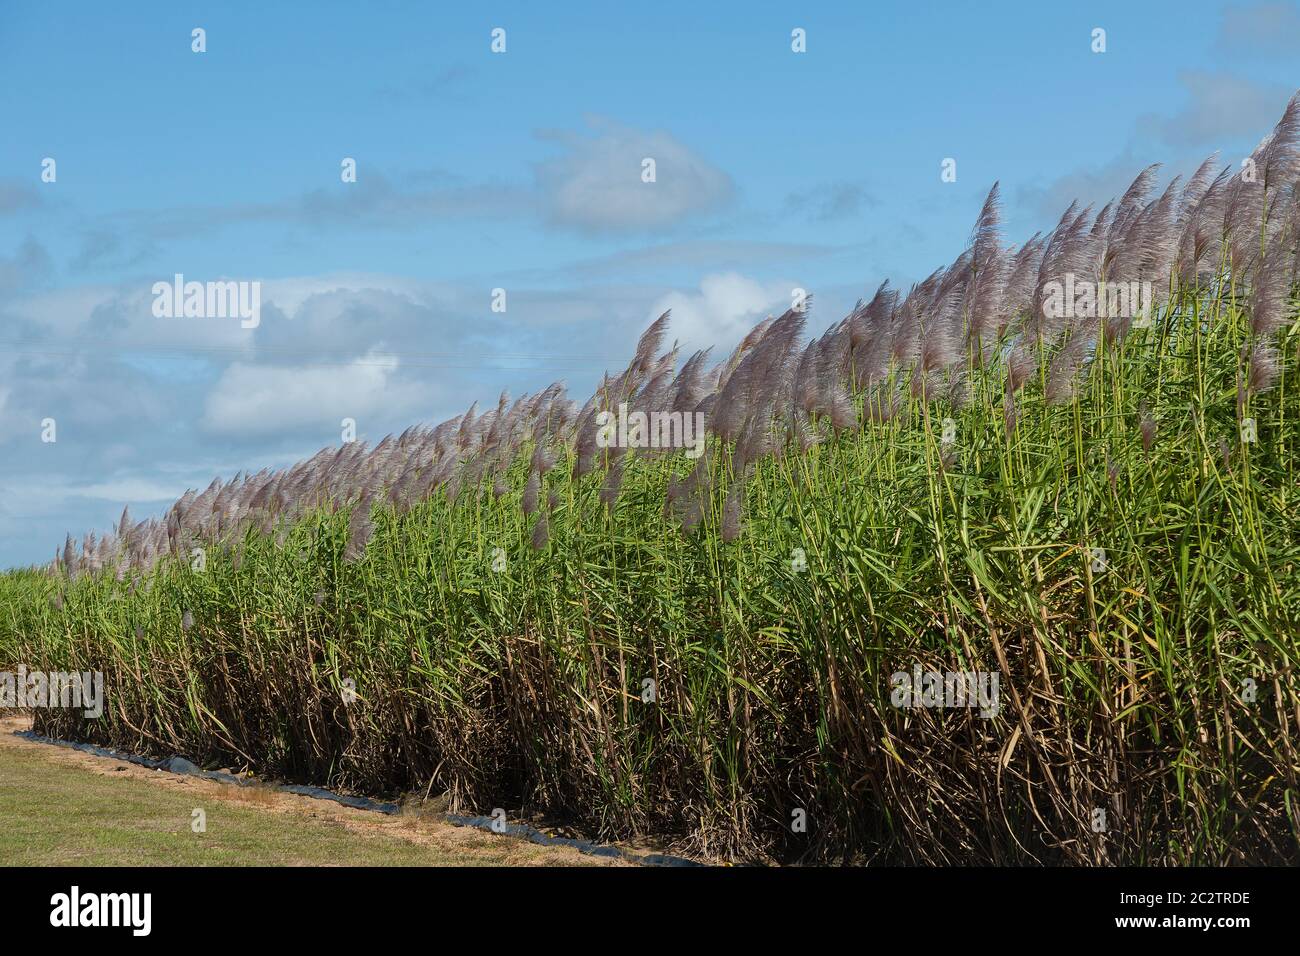 Crop of sugarcane with flowers with blue sky with clouds in background Stock Photo